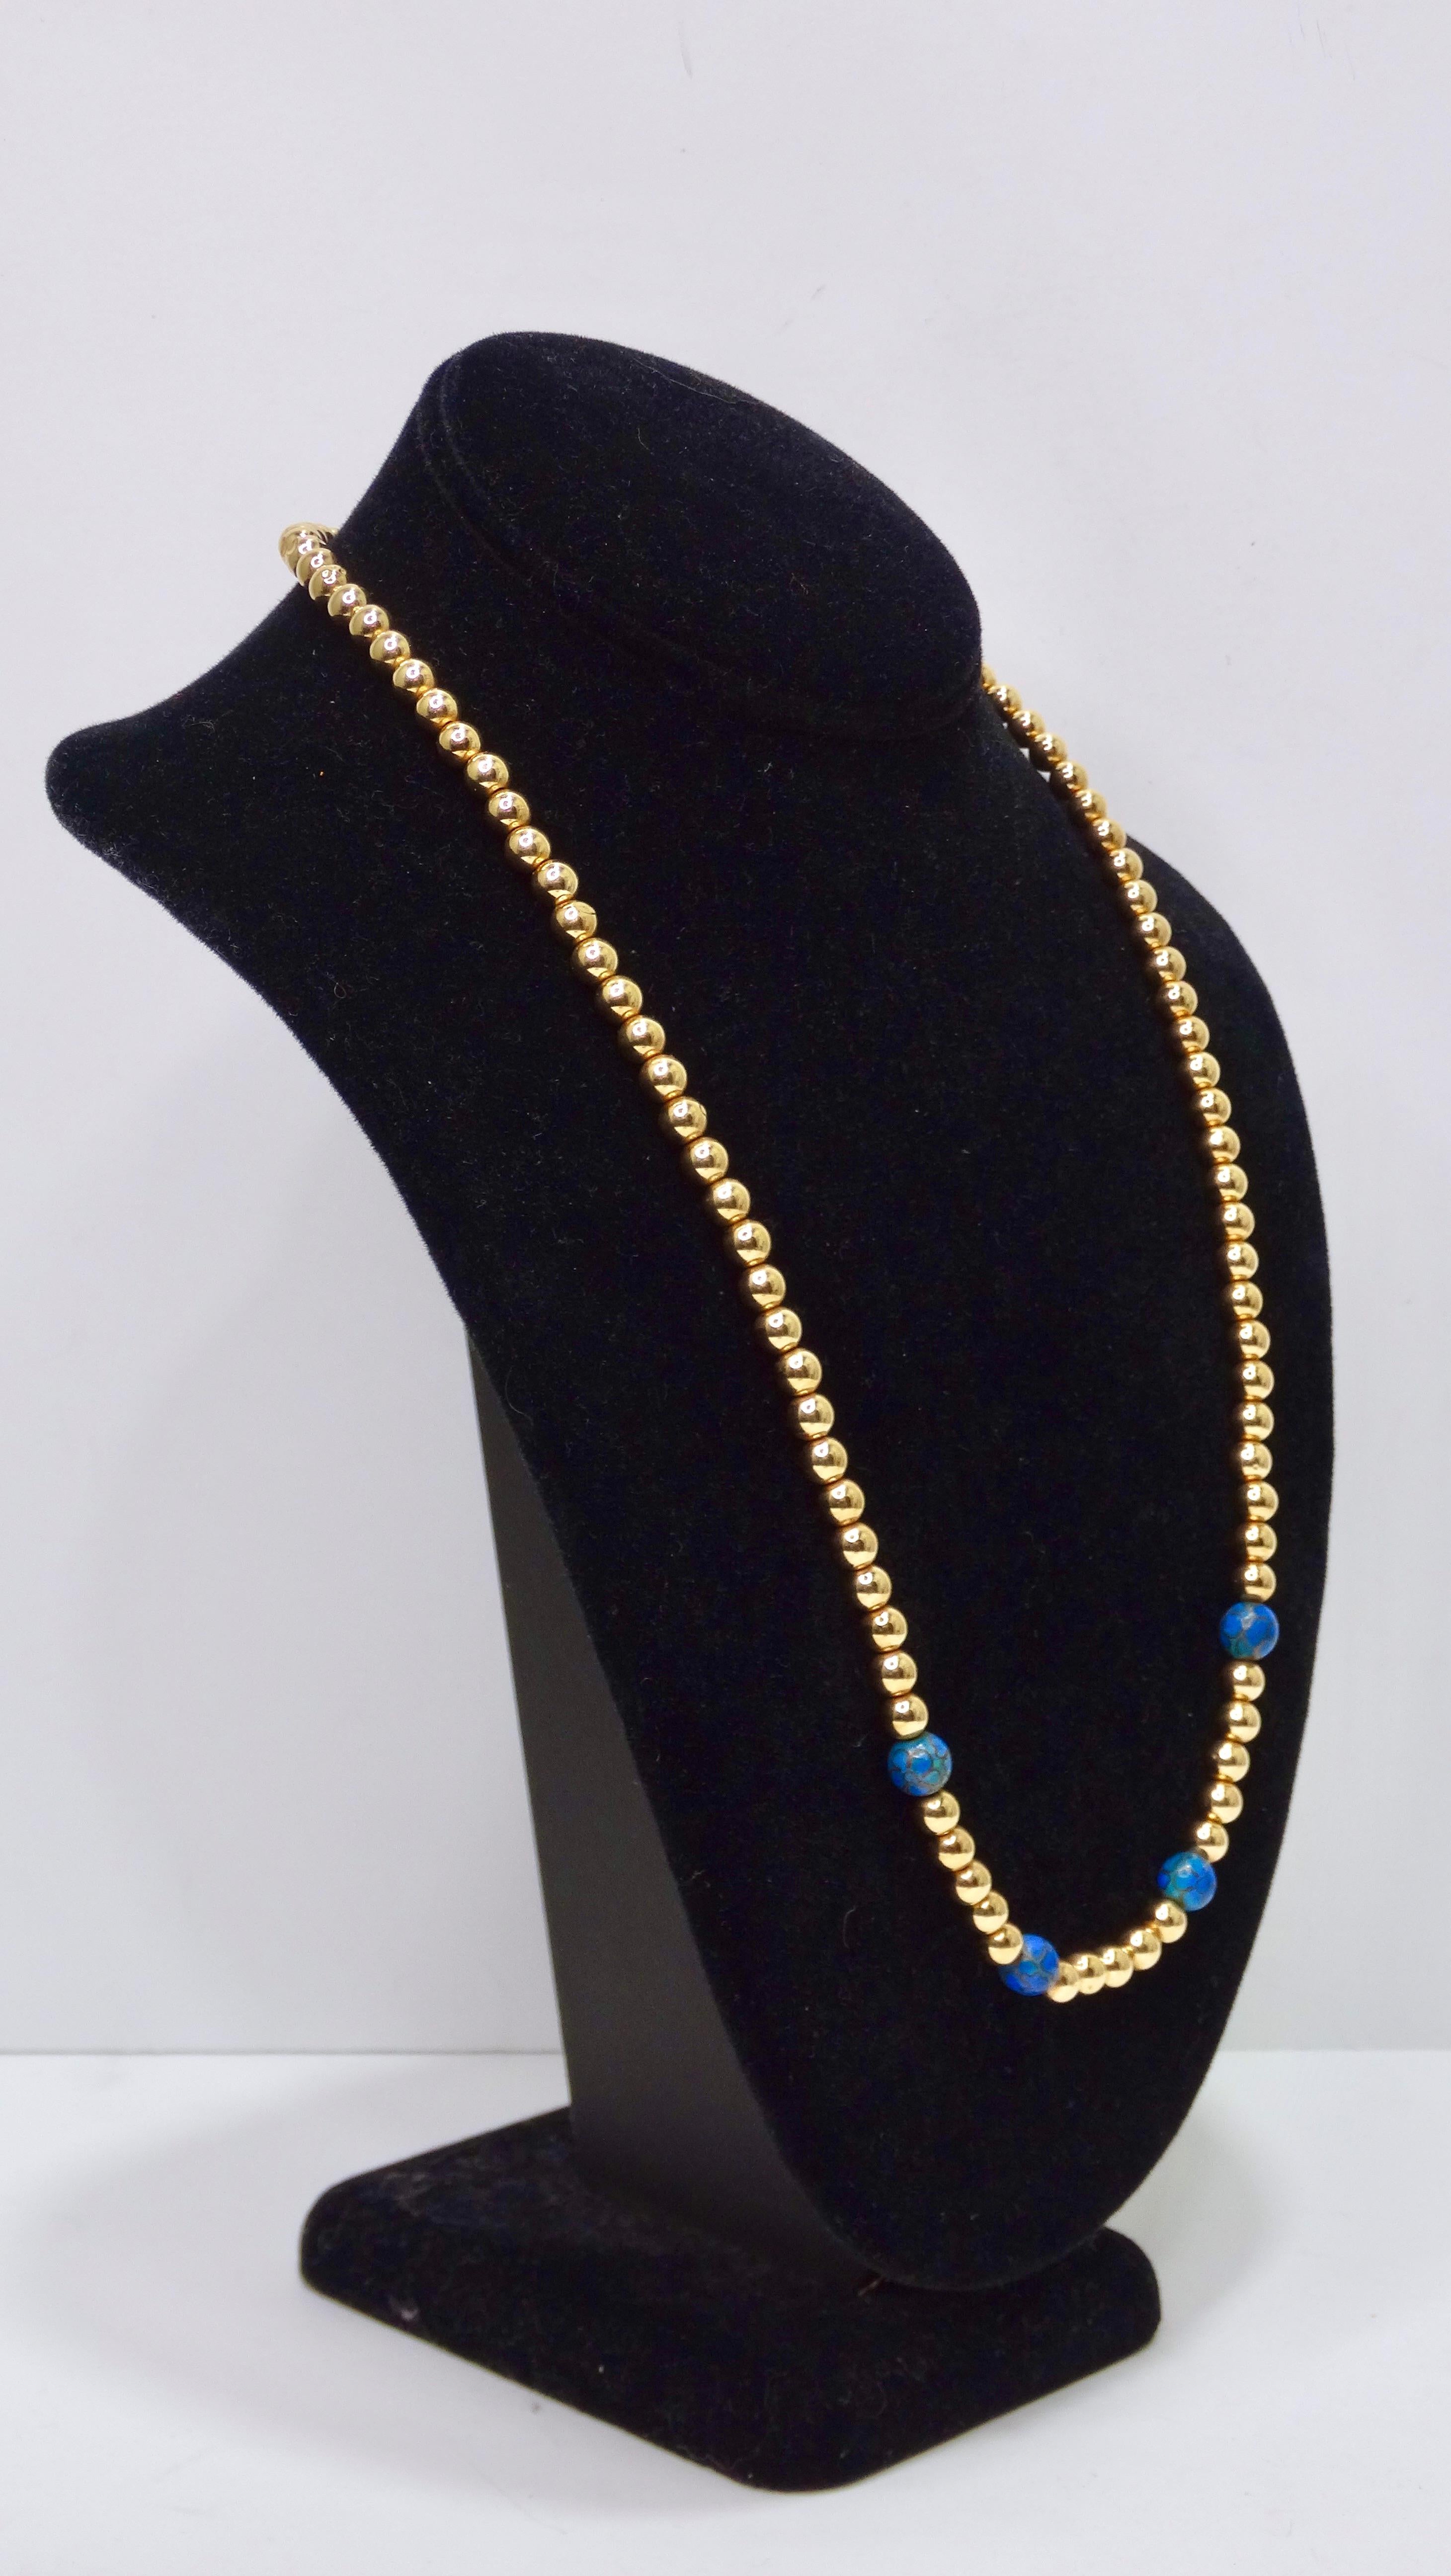 Cloisonne and 14k Gold Beaded Necklace In Excellent Condition For Sale In Scottsdale, AZ